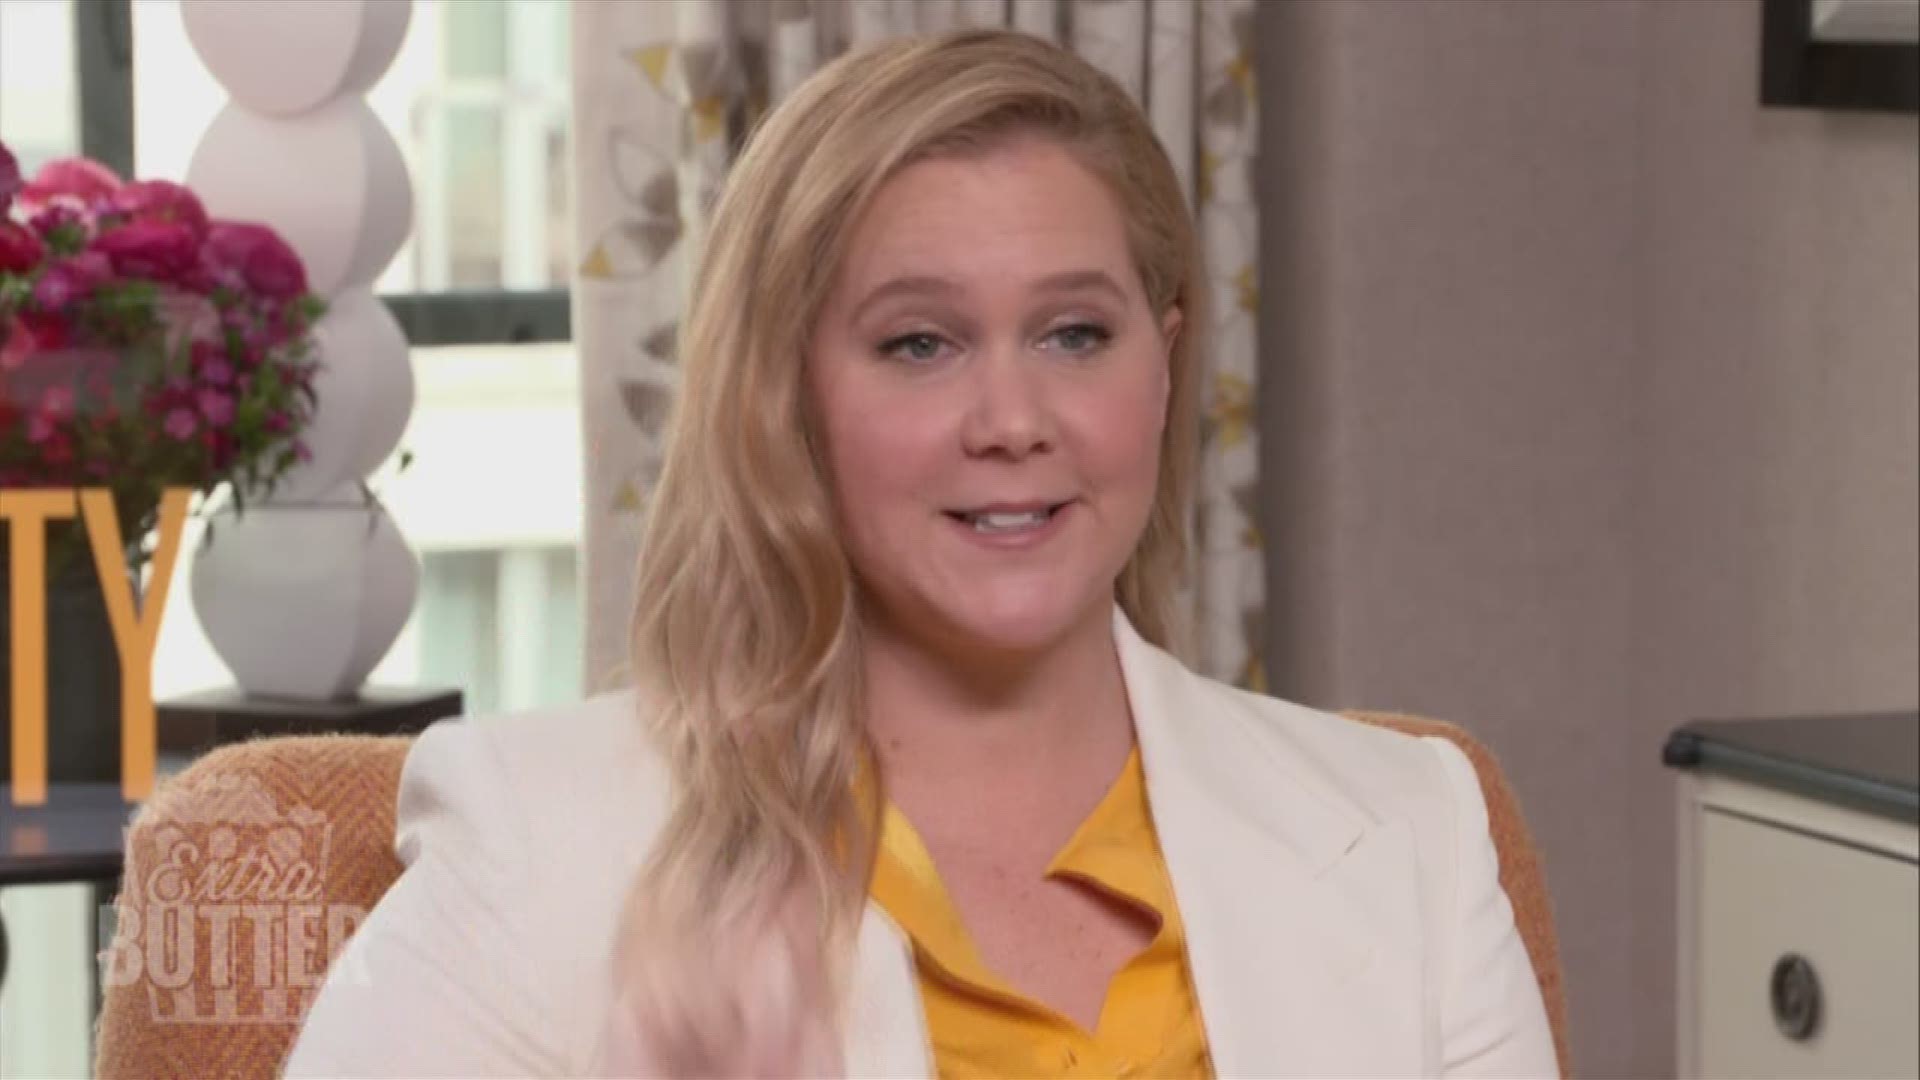 Amy Schumer's 'I Feel Pretty' made Mark S Allen cry. (Travel and accommodations paid for by STXfilms)